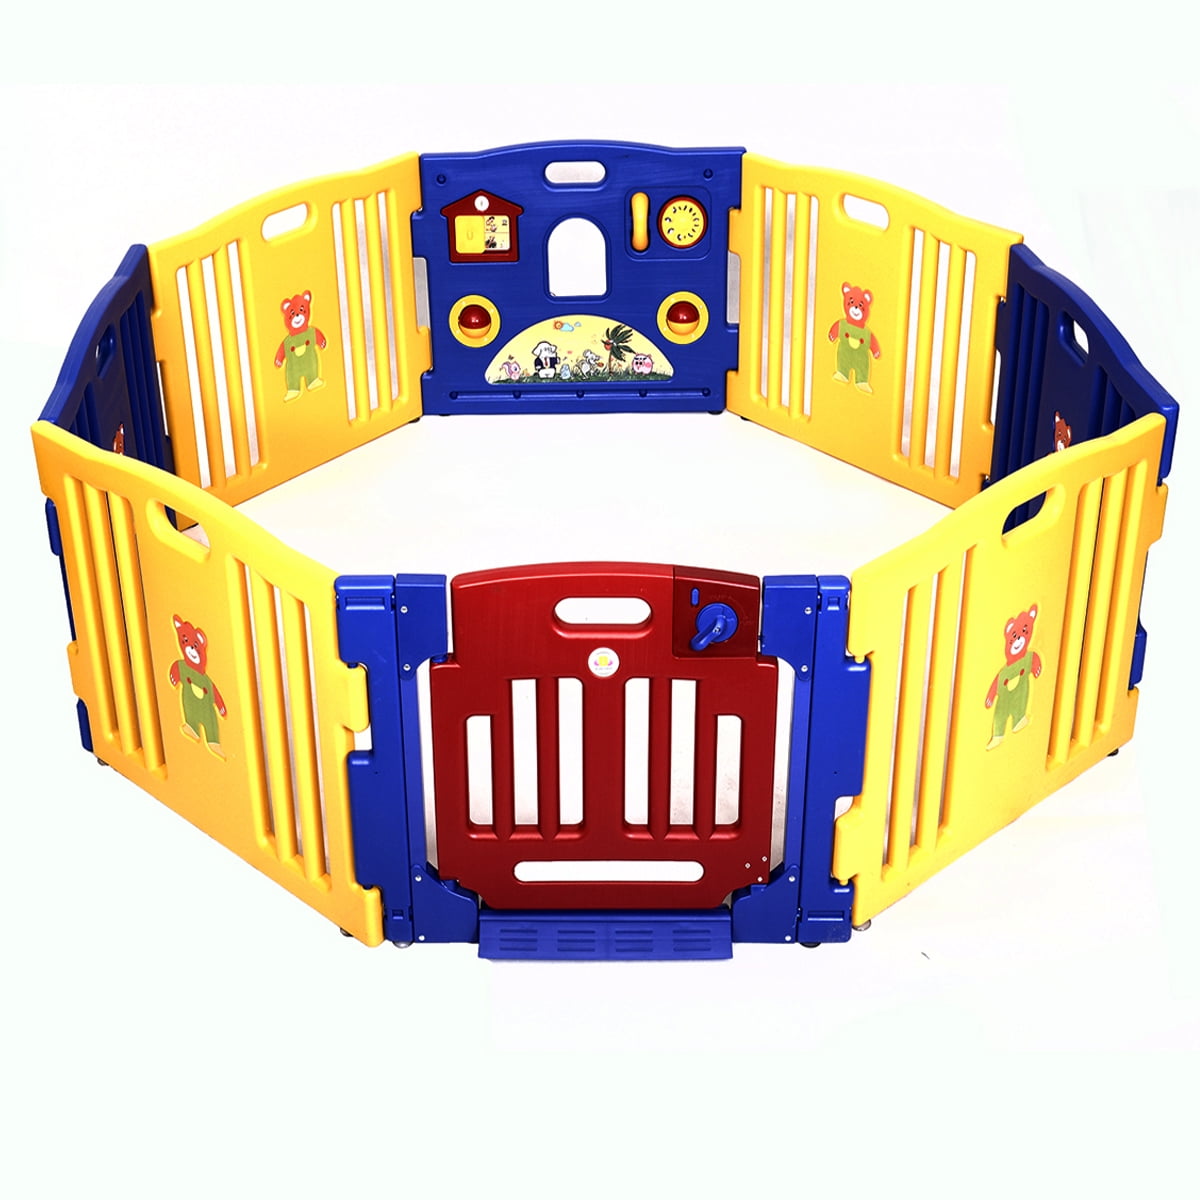 8 Panel Baby Safety Playpen Kids Play Center Fence Yard Home Indoor Outdoor Pen 